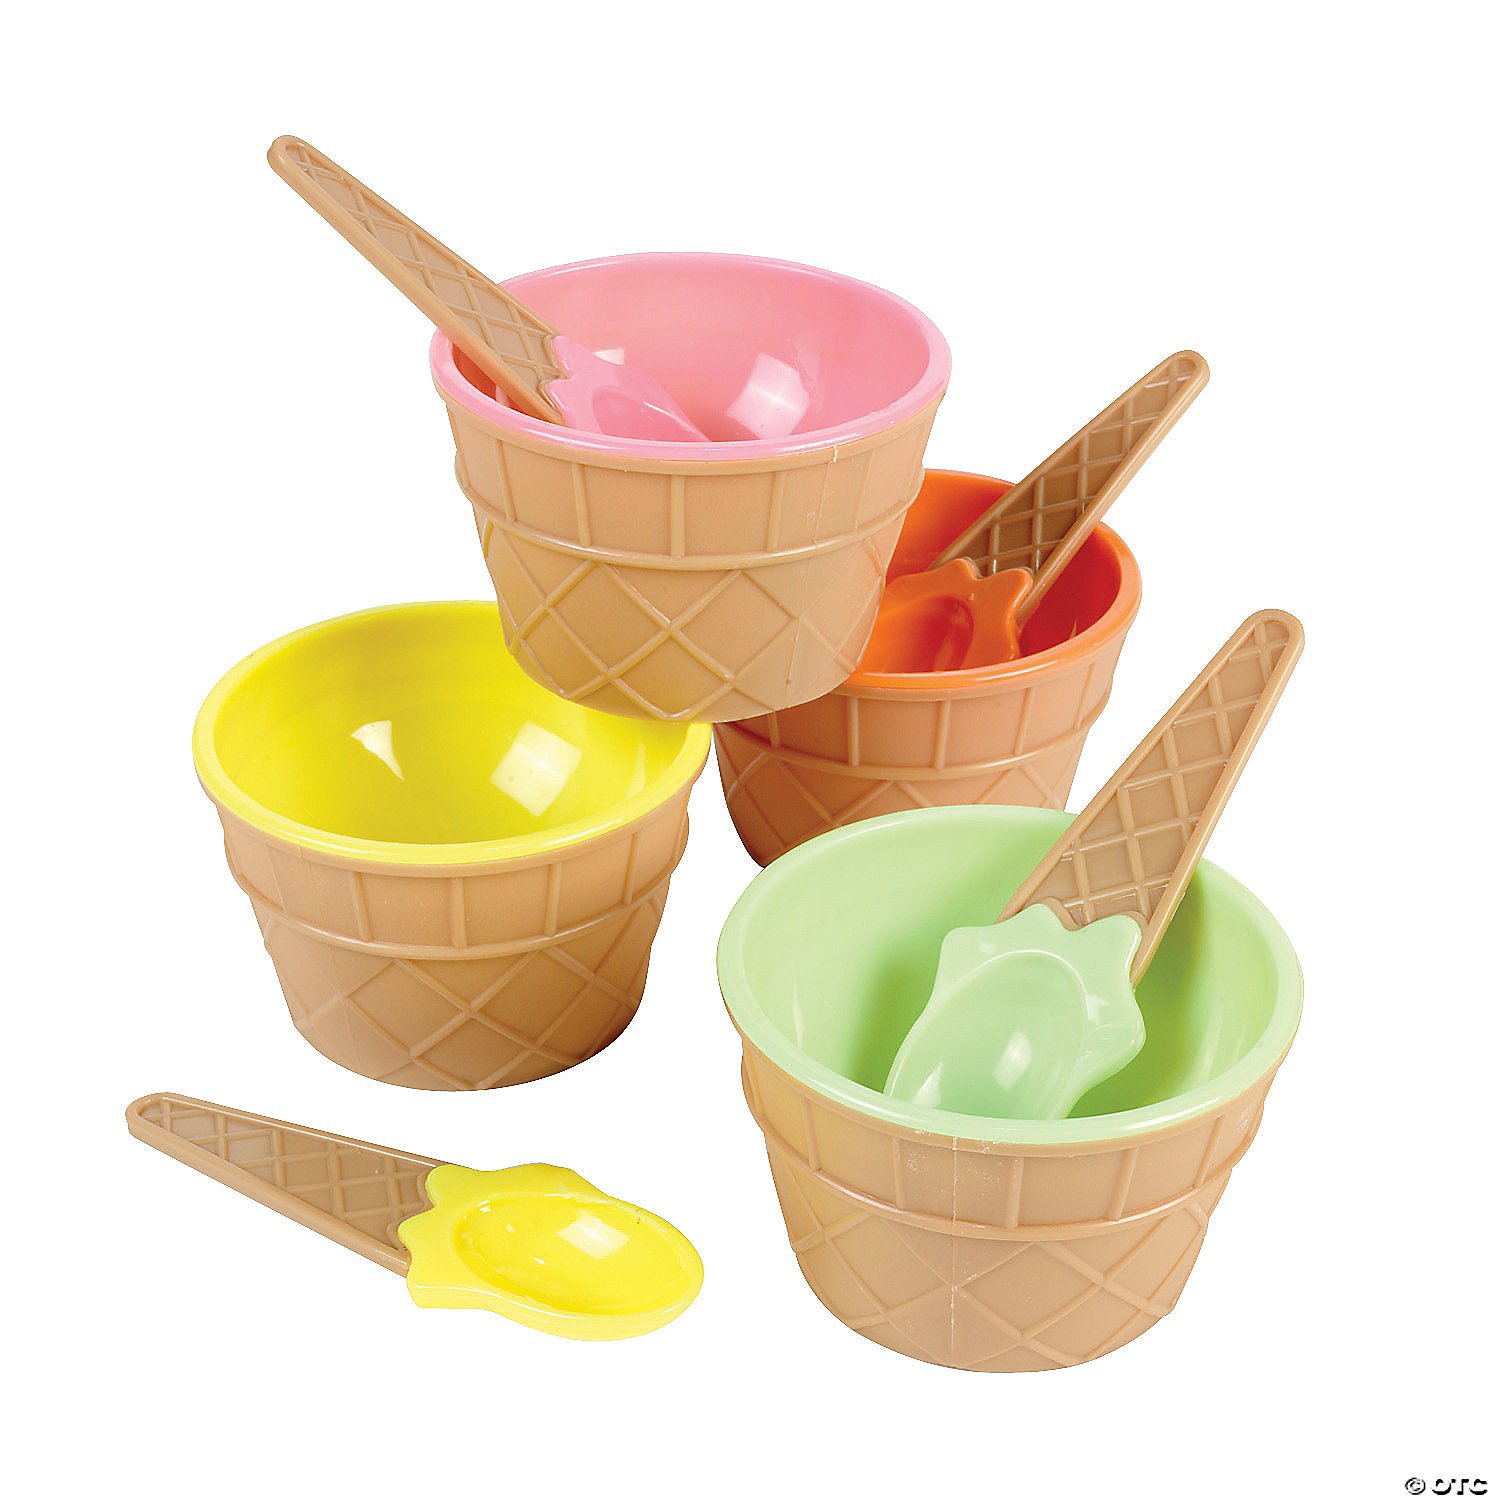 Opening an ice cream place is easy with quality plastic ice cream spoons and cups.